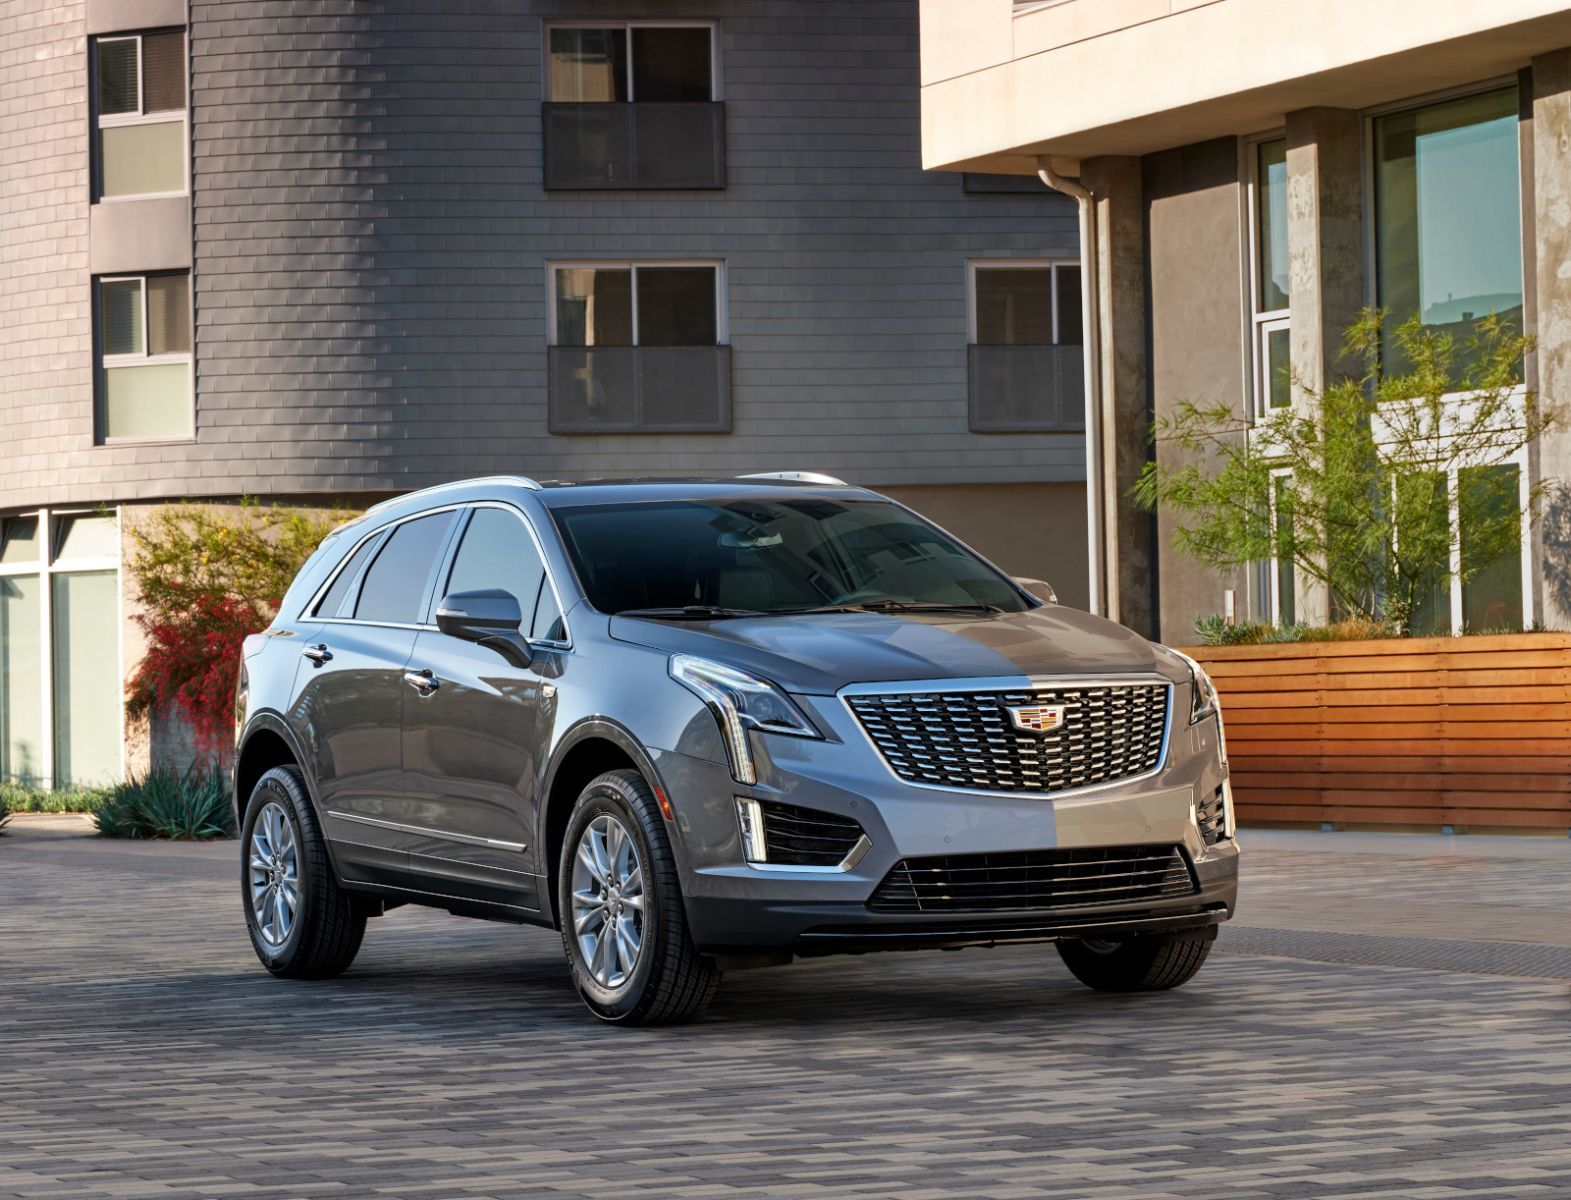 Cadillac SUVs: Luxury Meets Towing Power